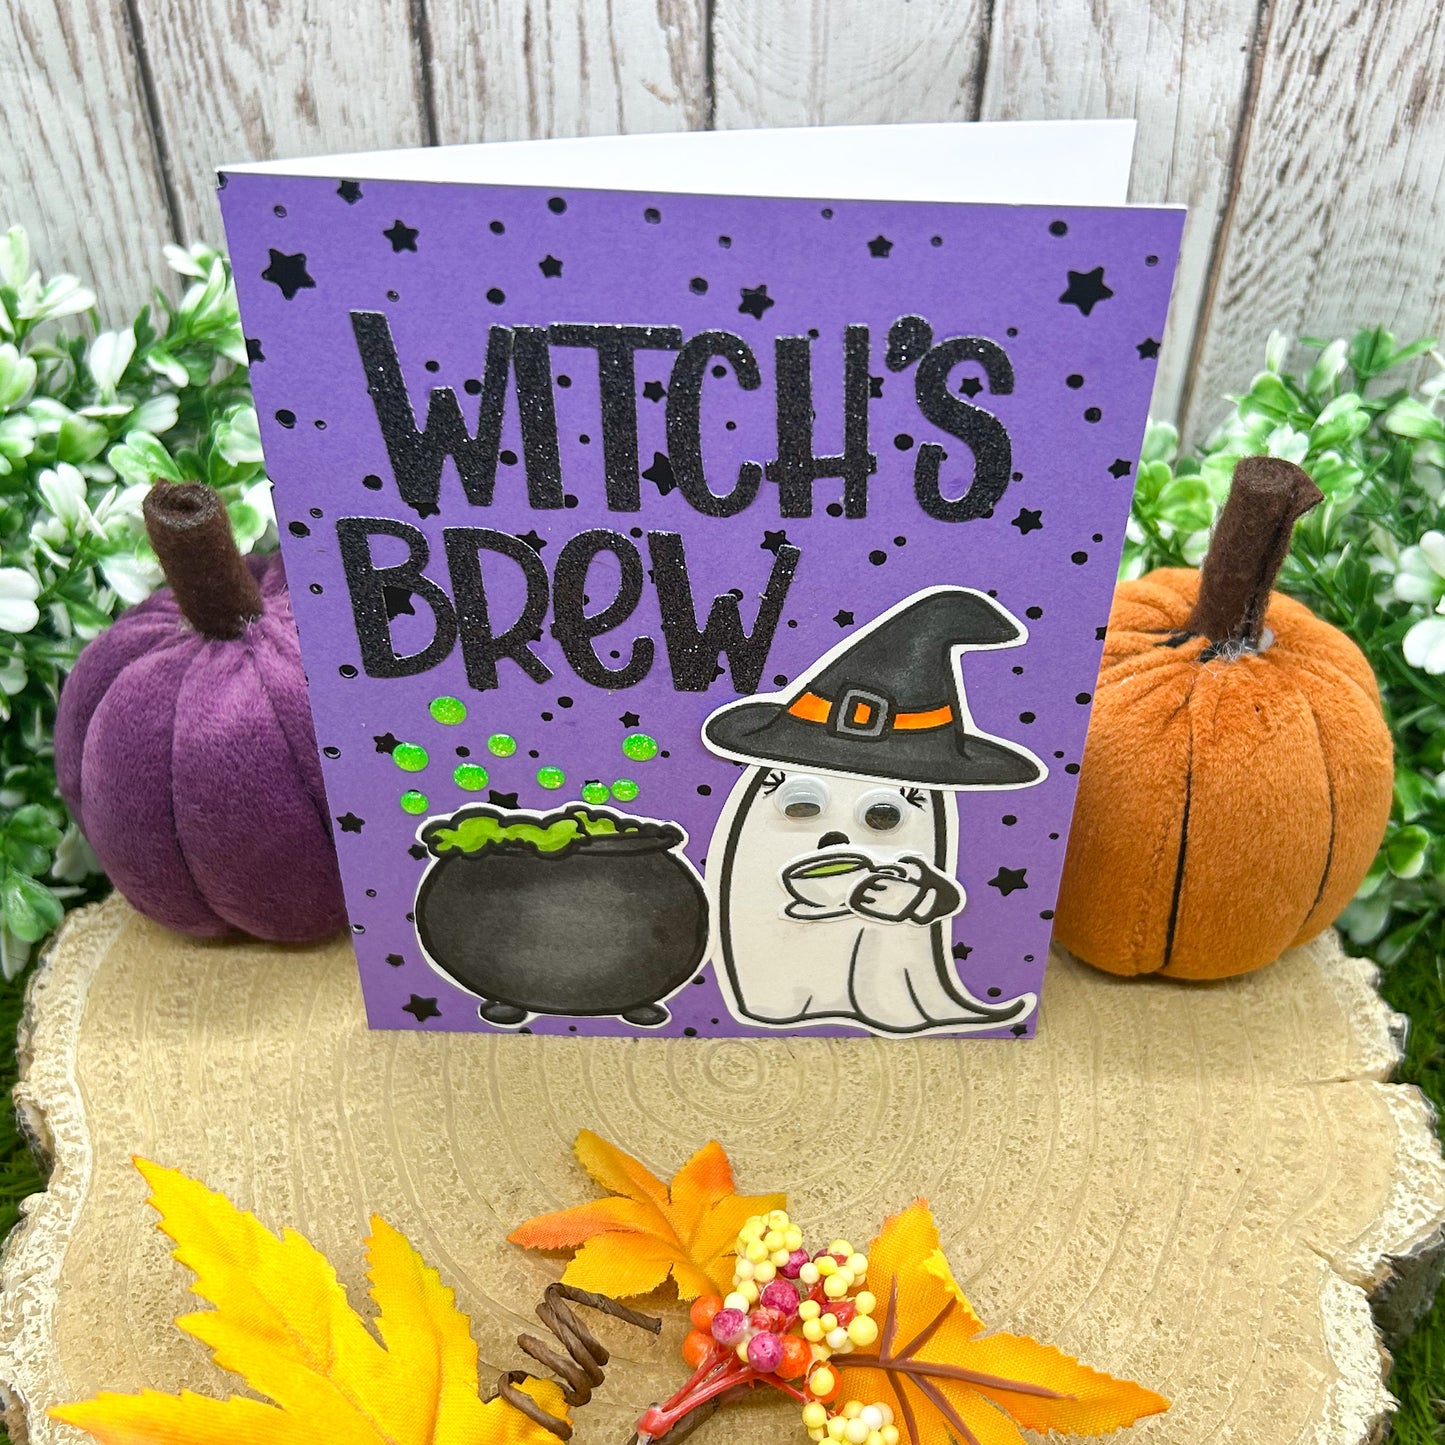 Witches Brew Ghost Handmade Halloween Card